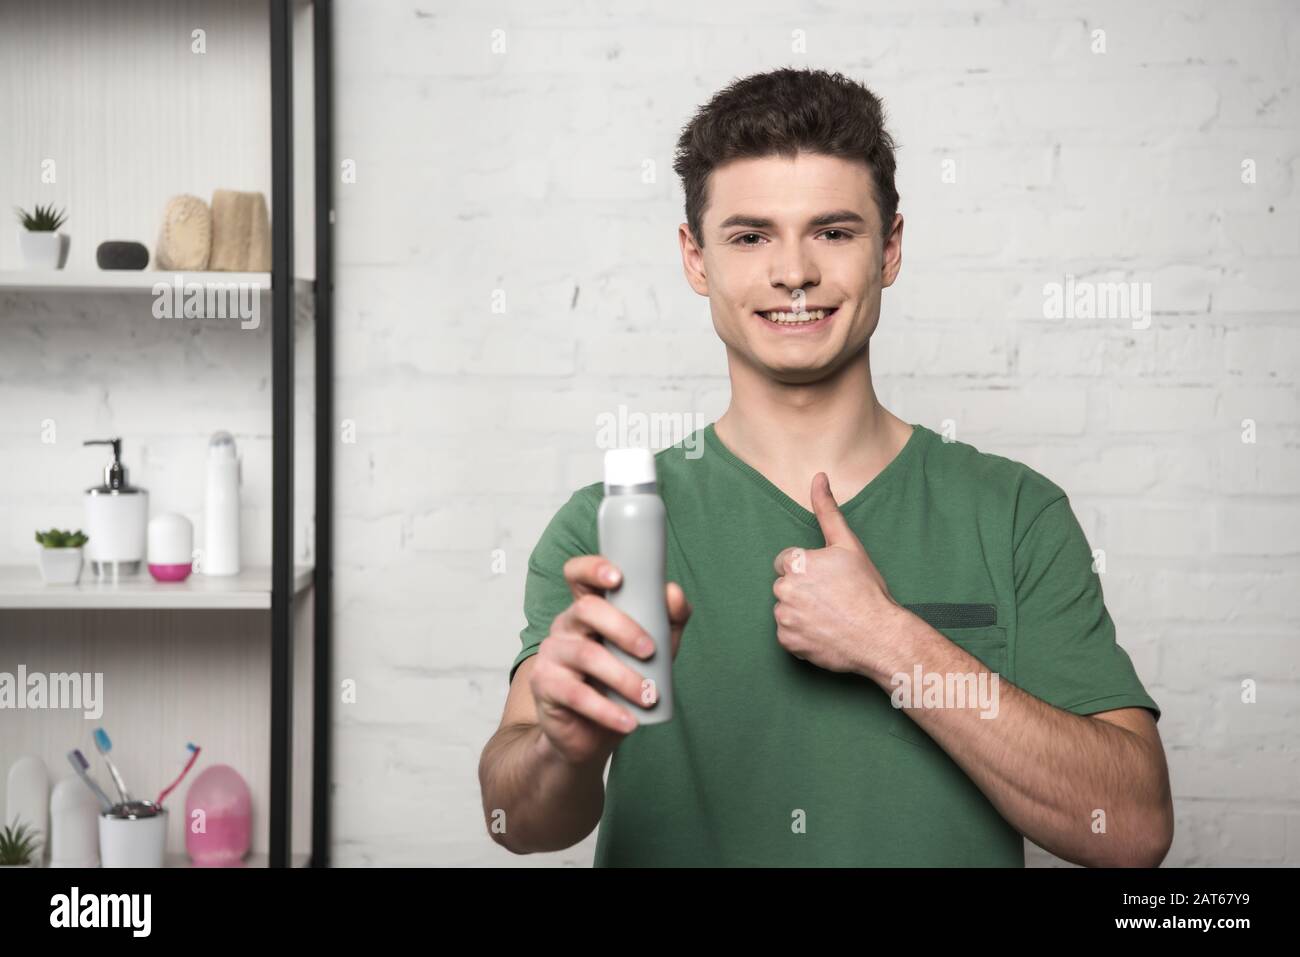 smiling young man showing thumb up while holding deodorant and looking at  camera Stock Photo - Alamy